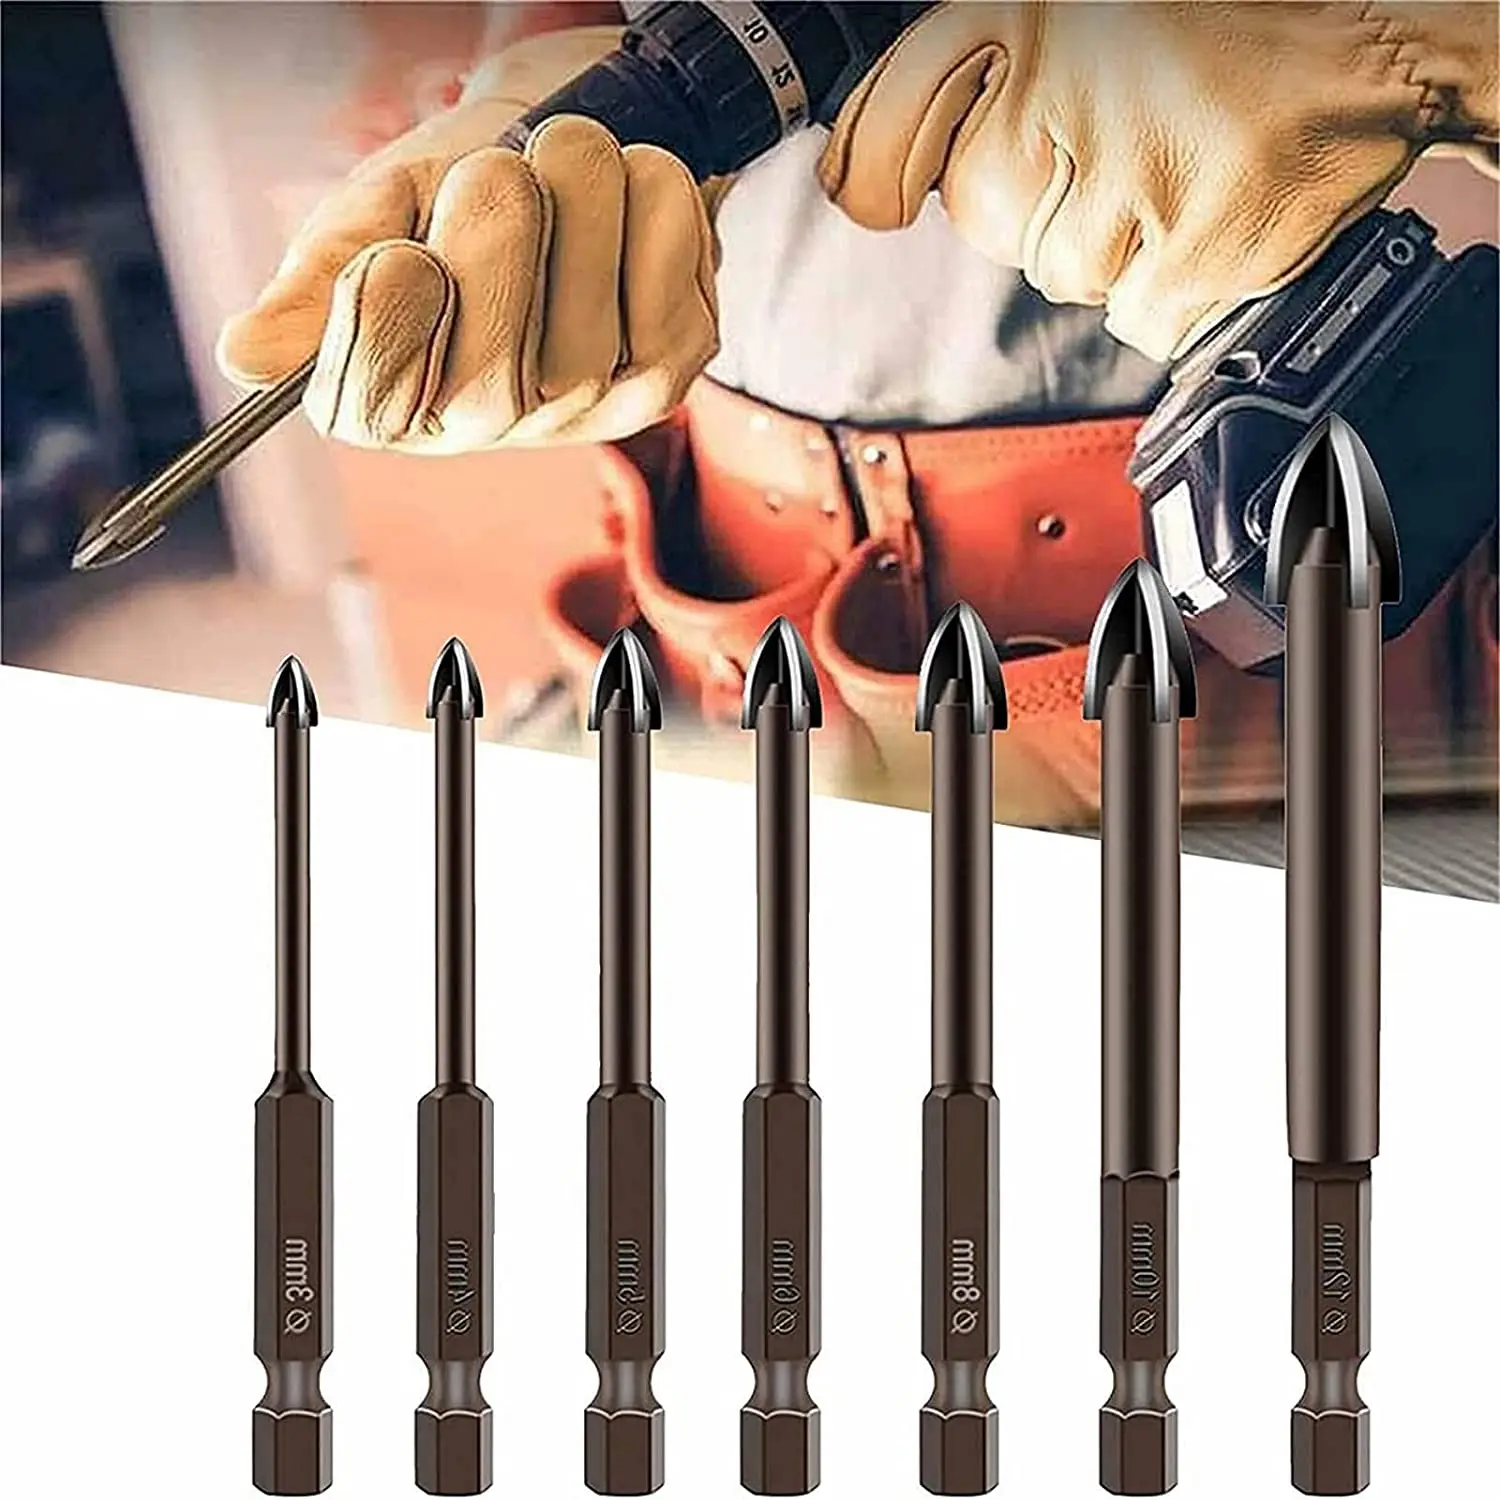 Efficient Universal Drilling Tool Multifunctional Cross Alloy Drill Bit Tile Concrete Glass Wall Hole Opening Tools Accessories